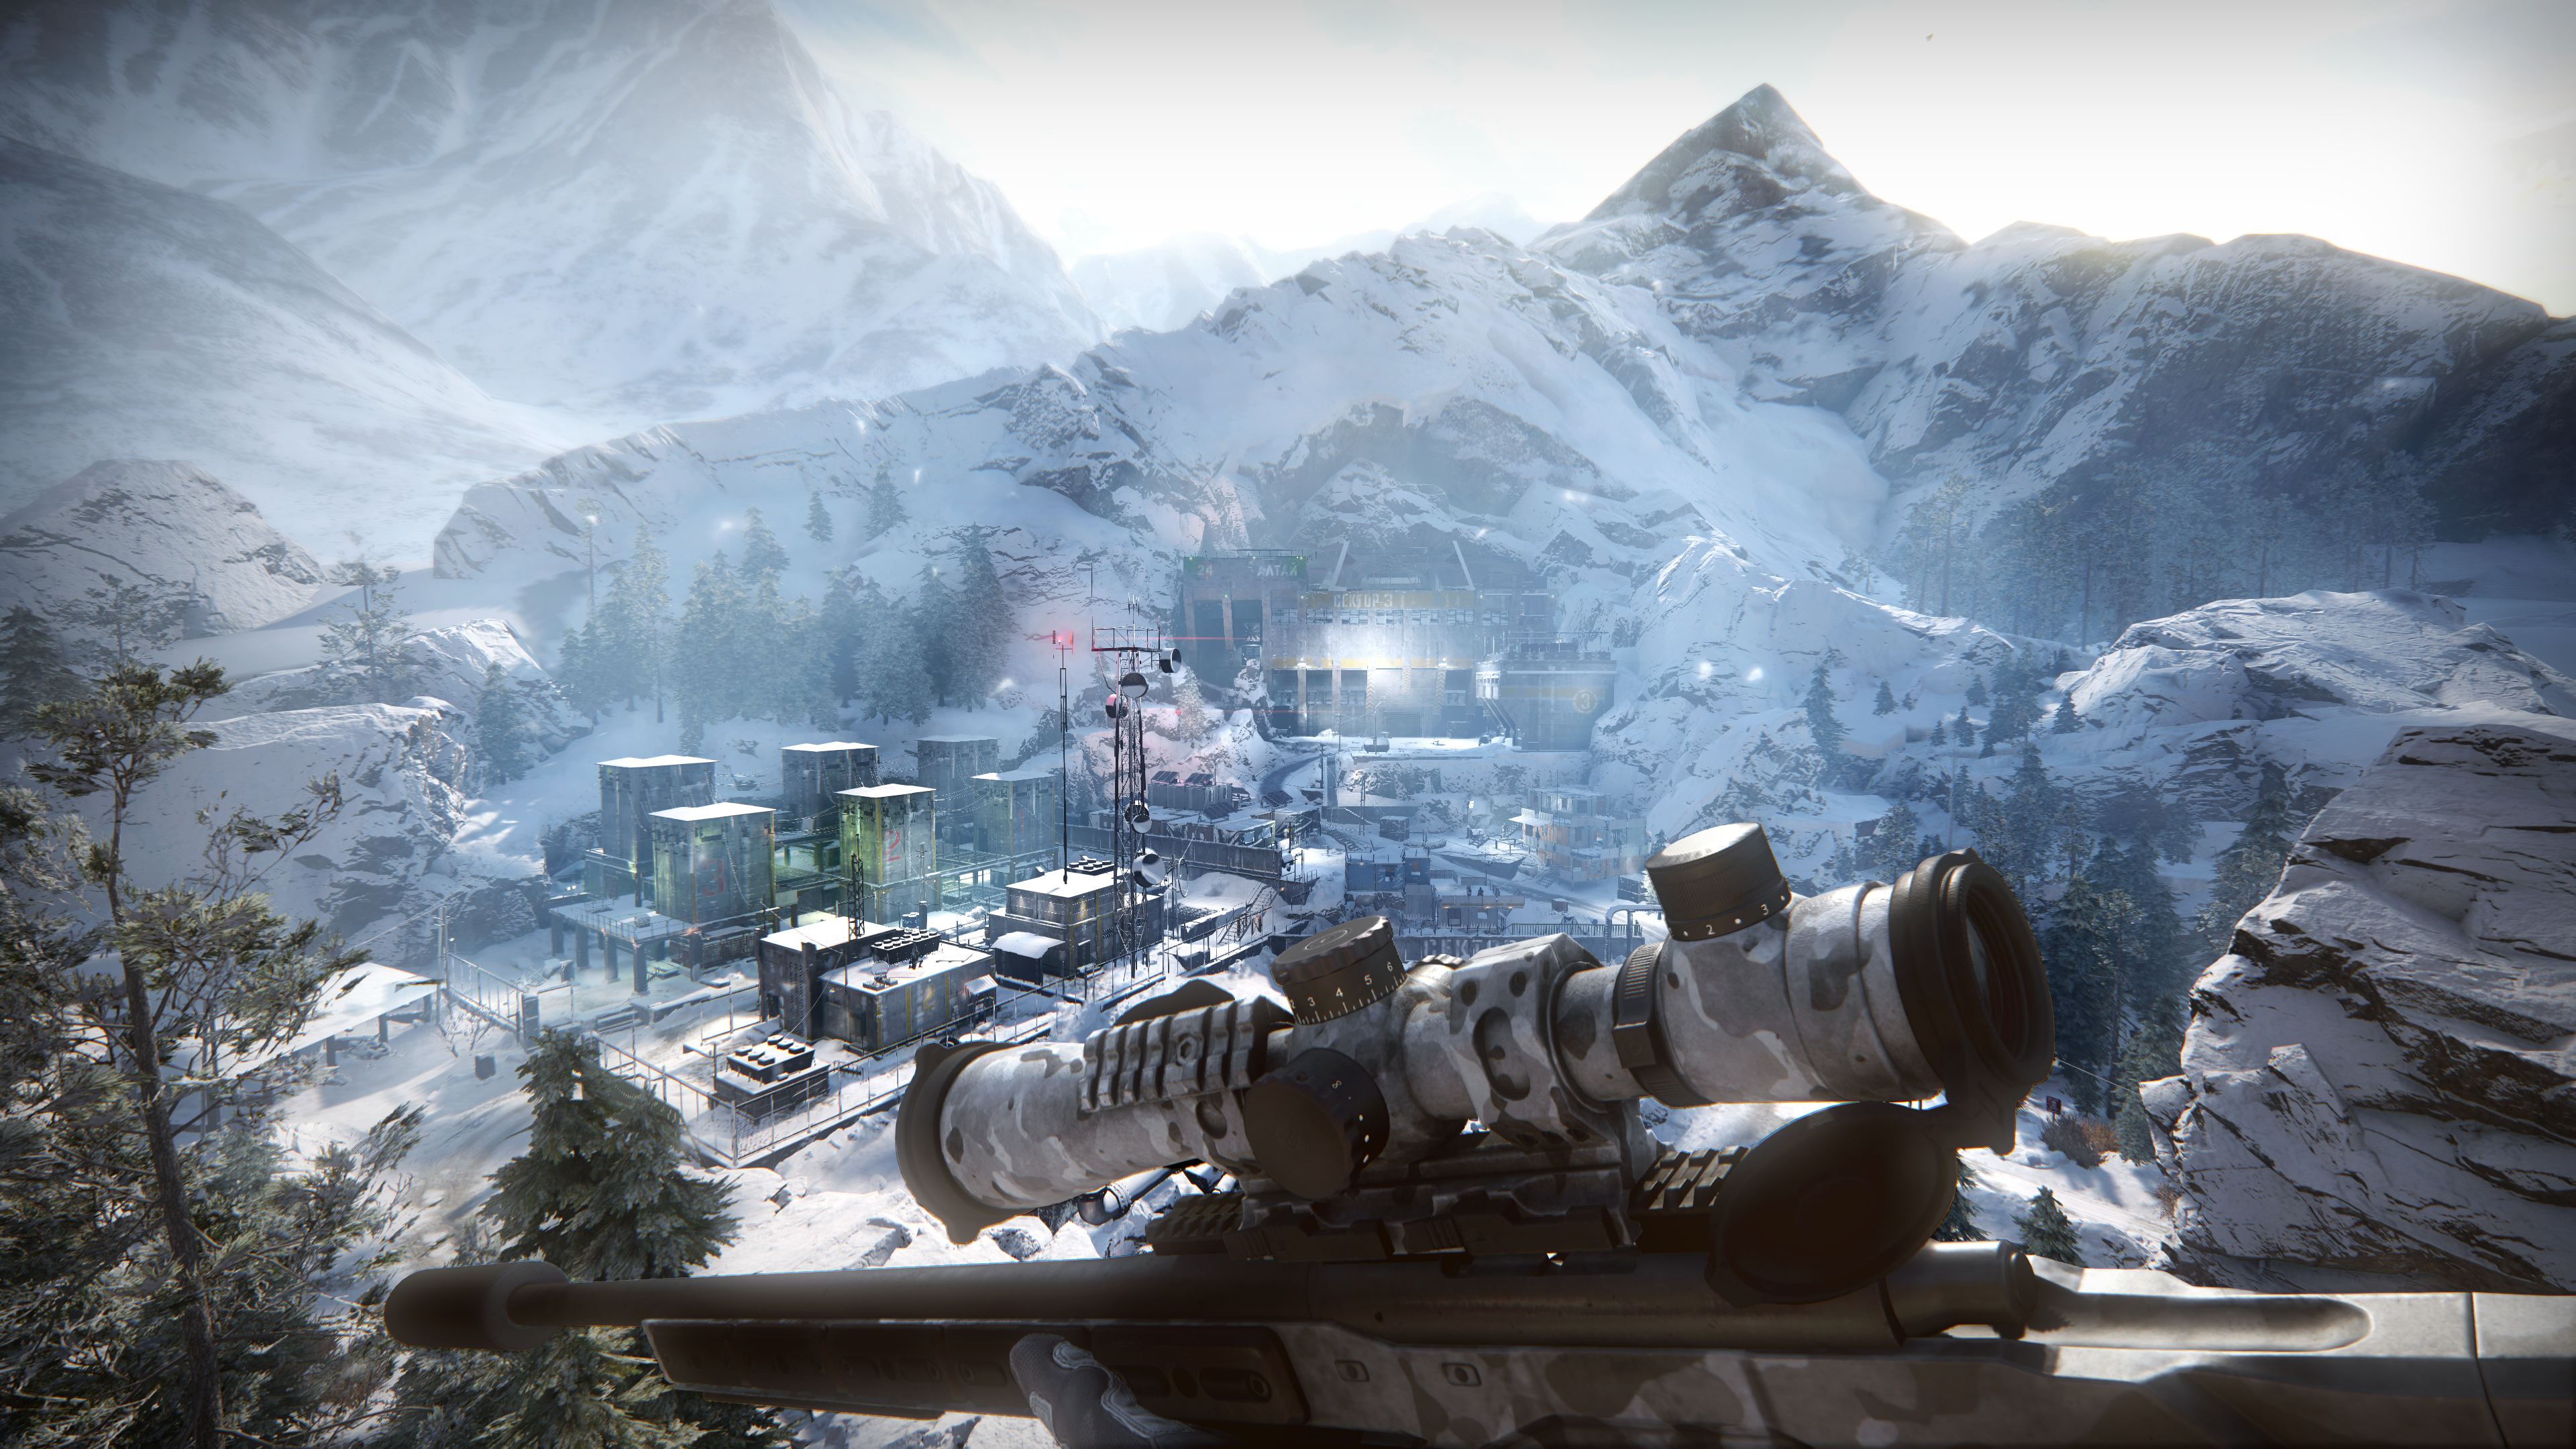 sniper ghost warrior contracts 1 download